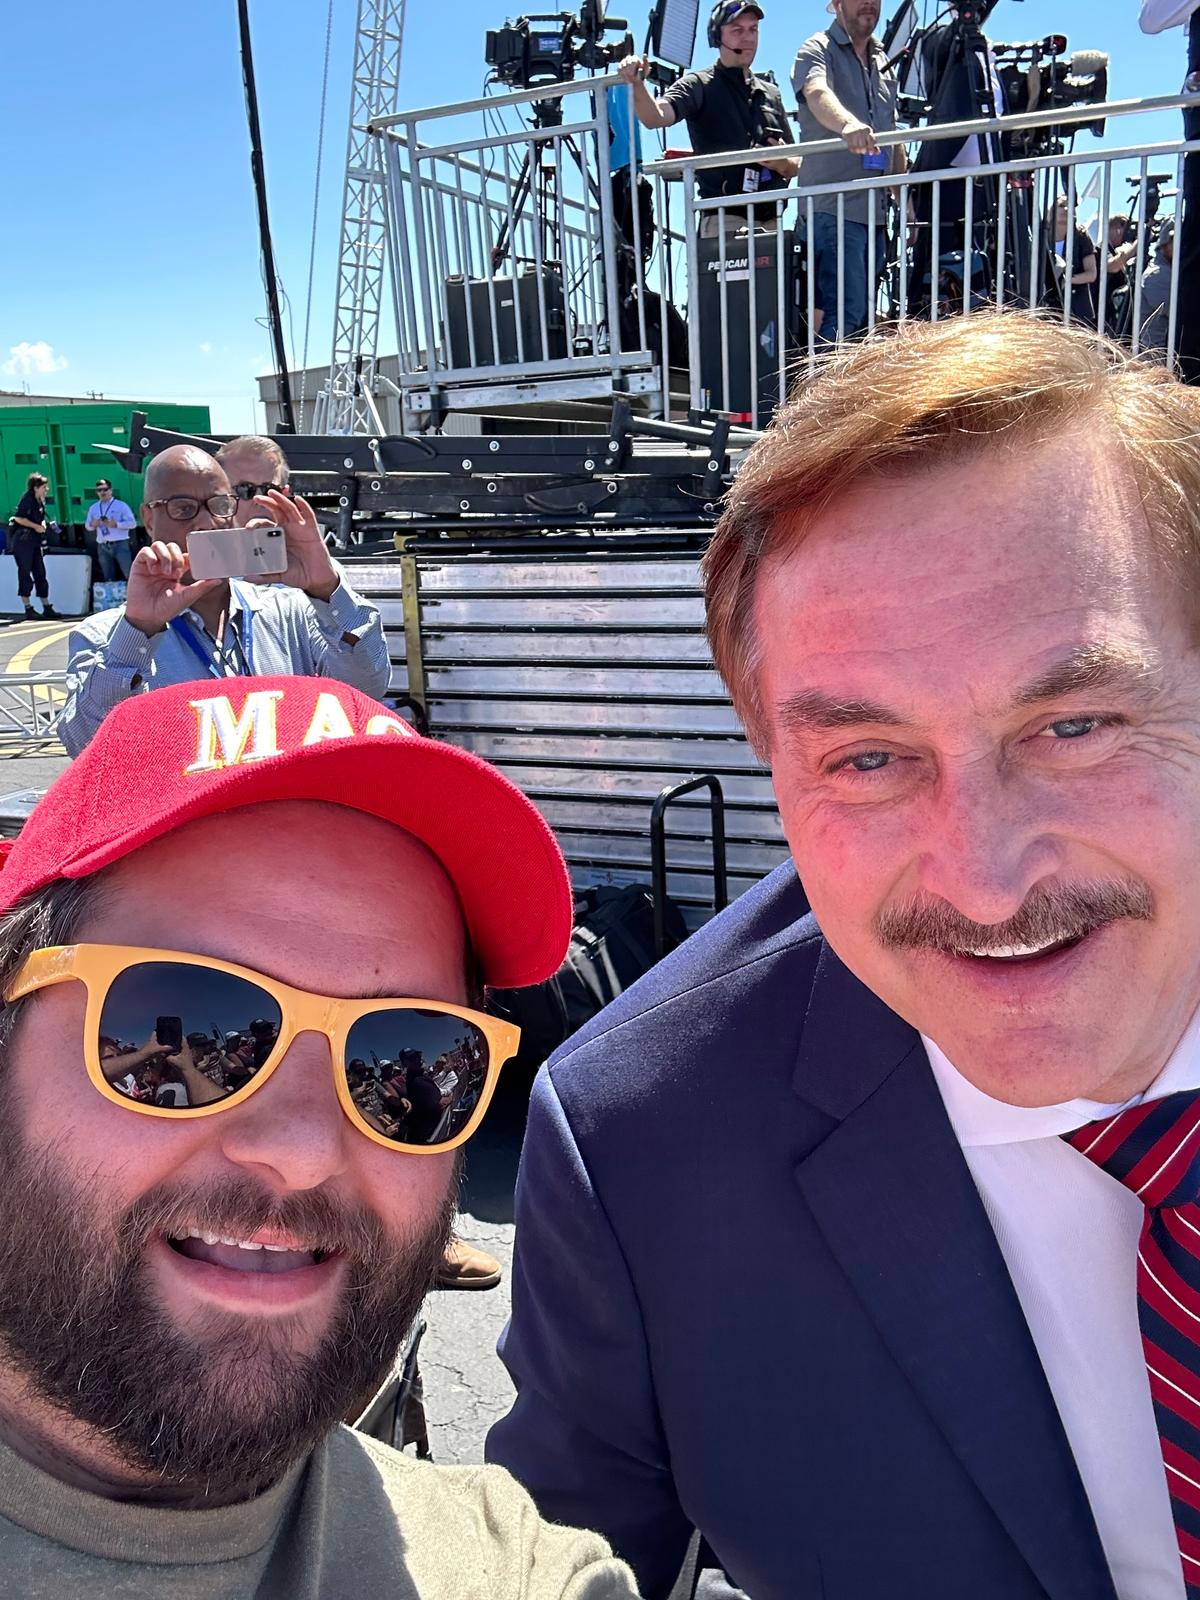 Trump supporter Dylan Marshall (L) of Waco, Texas, posed with celebrity businessman Mike Lindell at a rally for former President Donald Trump in Waco, Texas, on March 25, 2023. (Courtesy of Dylan Marshall)